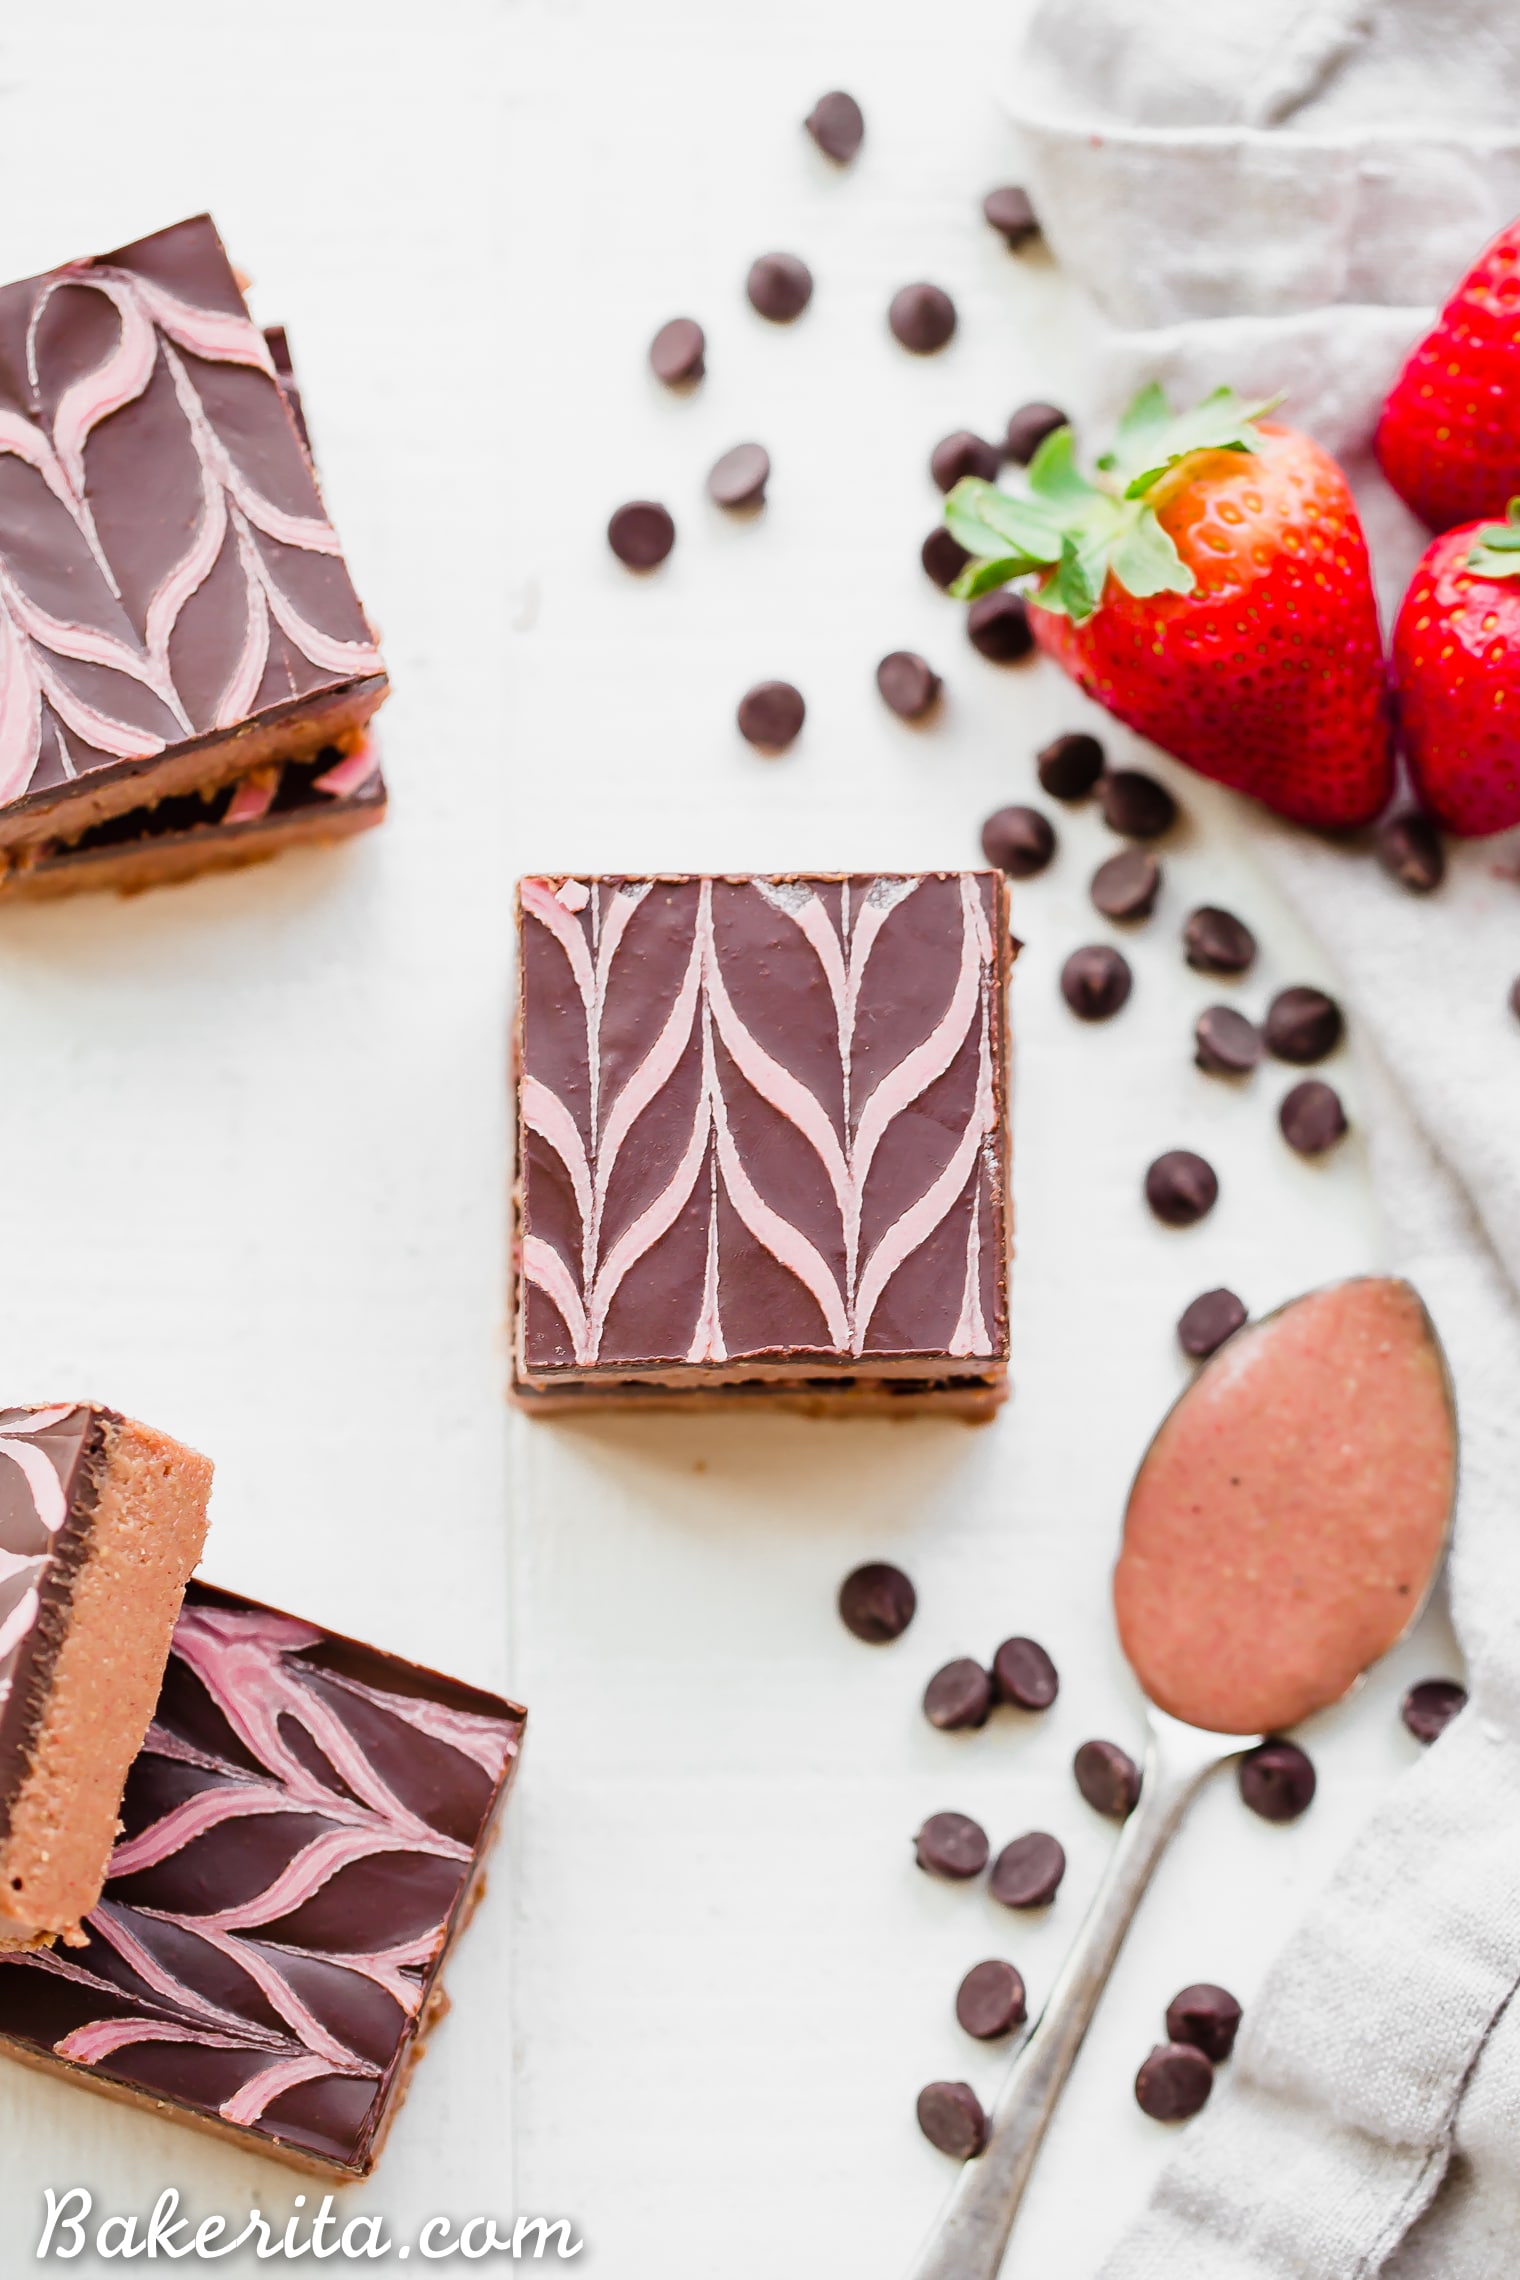 These No Bake Chocolate Strawberry Cashew Butter Bars have a creamy strawberry cashew butter base, topped with dark chocolate and a strawberry drizzle. You only need seven ingredients to make these irresistible gluten-free, paleo and vegan cashew butter bars.